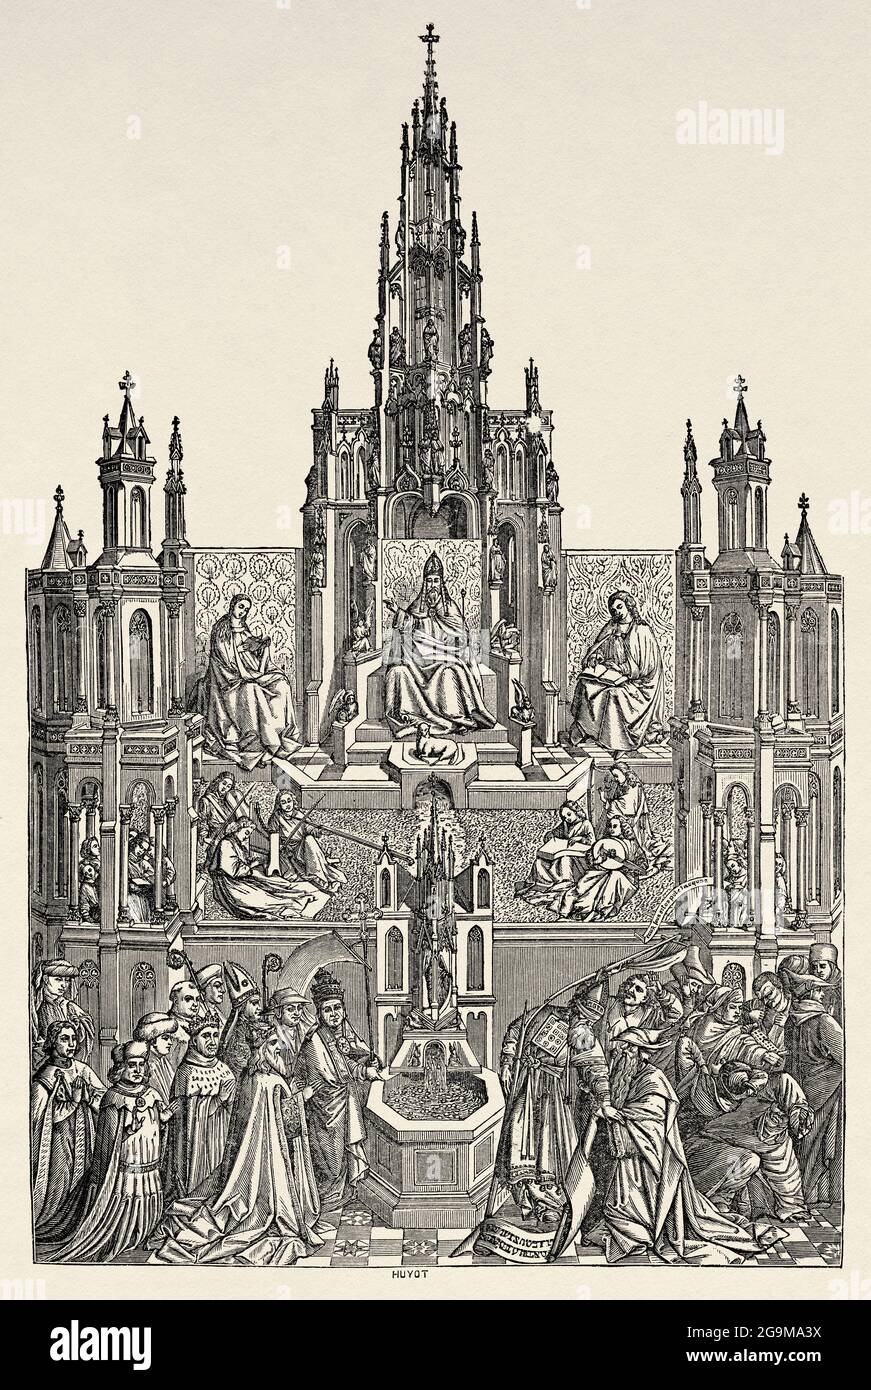 La Fuente De La Vida. The Fountain of Grace, painting by Jan van Eyck (1390-1441) was a Flemish painter. Old 19th century engraved illustration from Jesus Christ by Veuillot 1881 Stock Photo